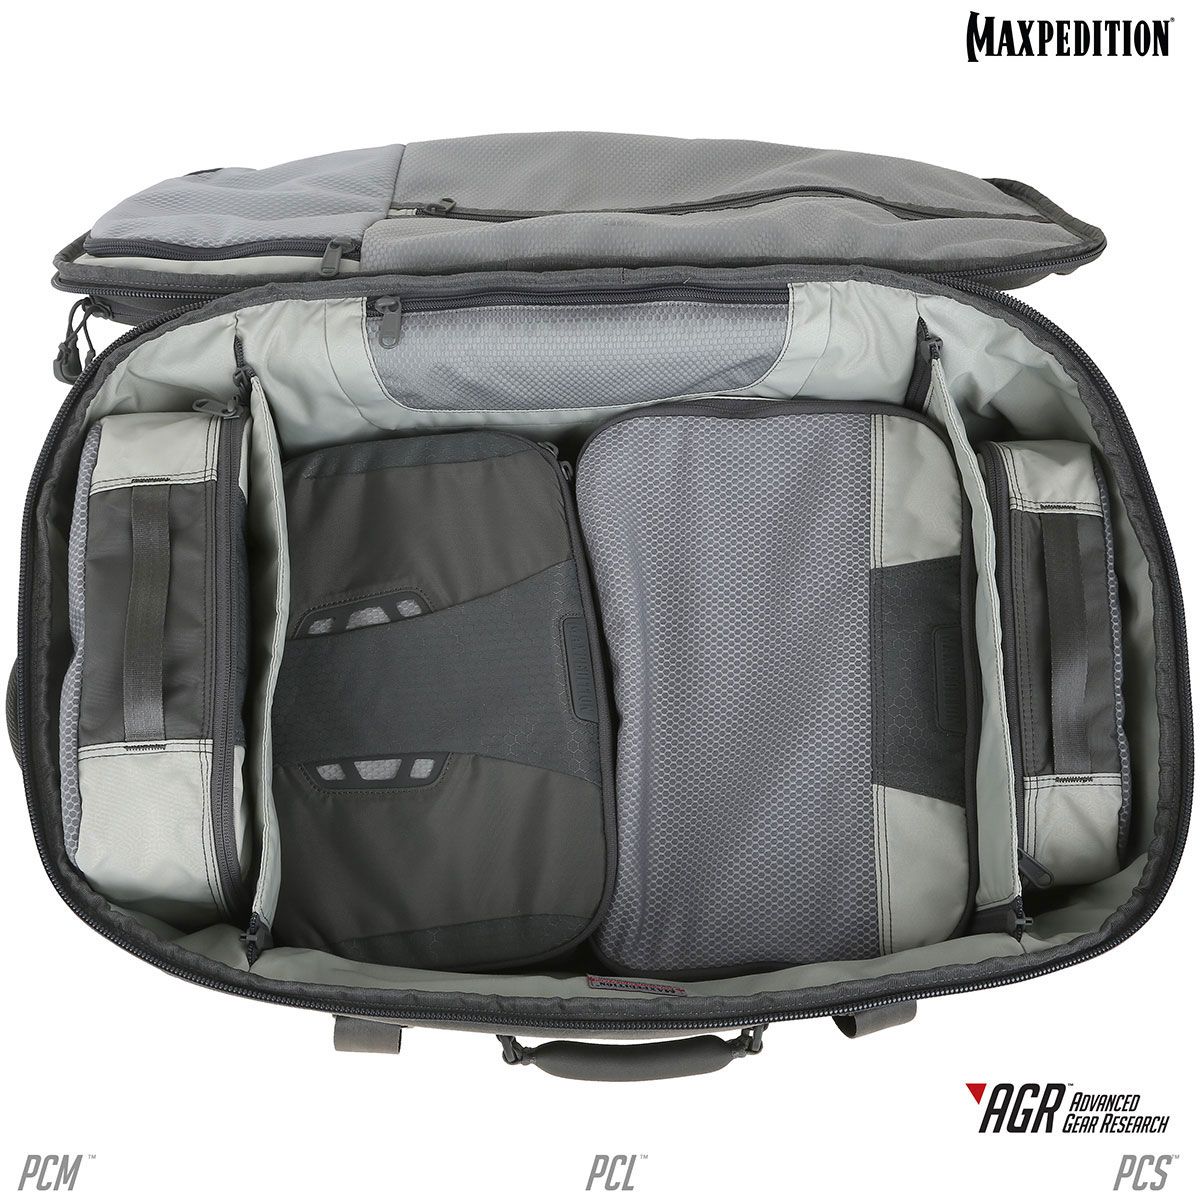 Maxpedition PCM Packing Cube Medium Gray Pcmgry for sale online 